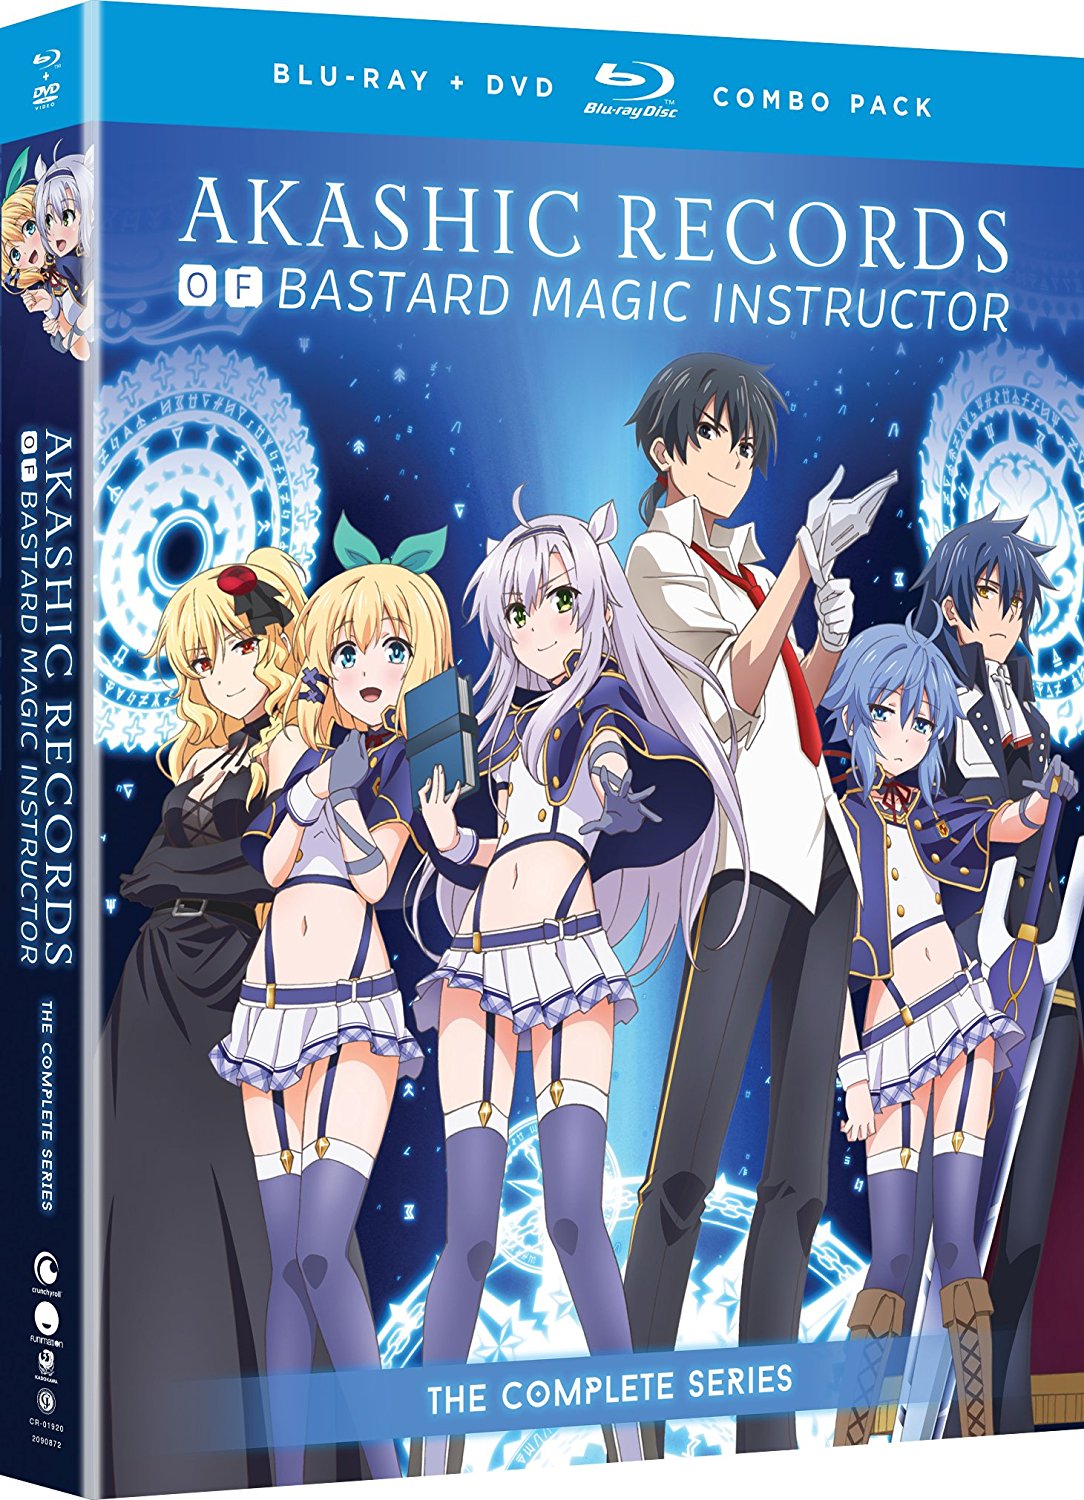 Akashic Records of Bastard Sistine Fibel Character Card Game Sleeves Anime  Vol.1286 : Amazon.in: Toys & Games